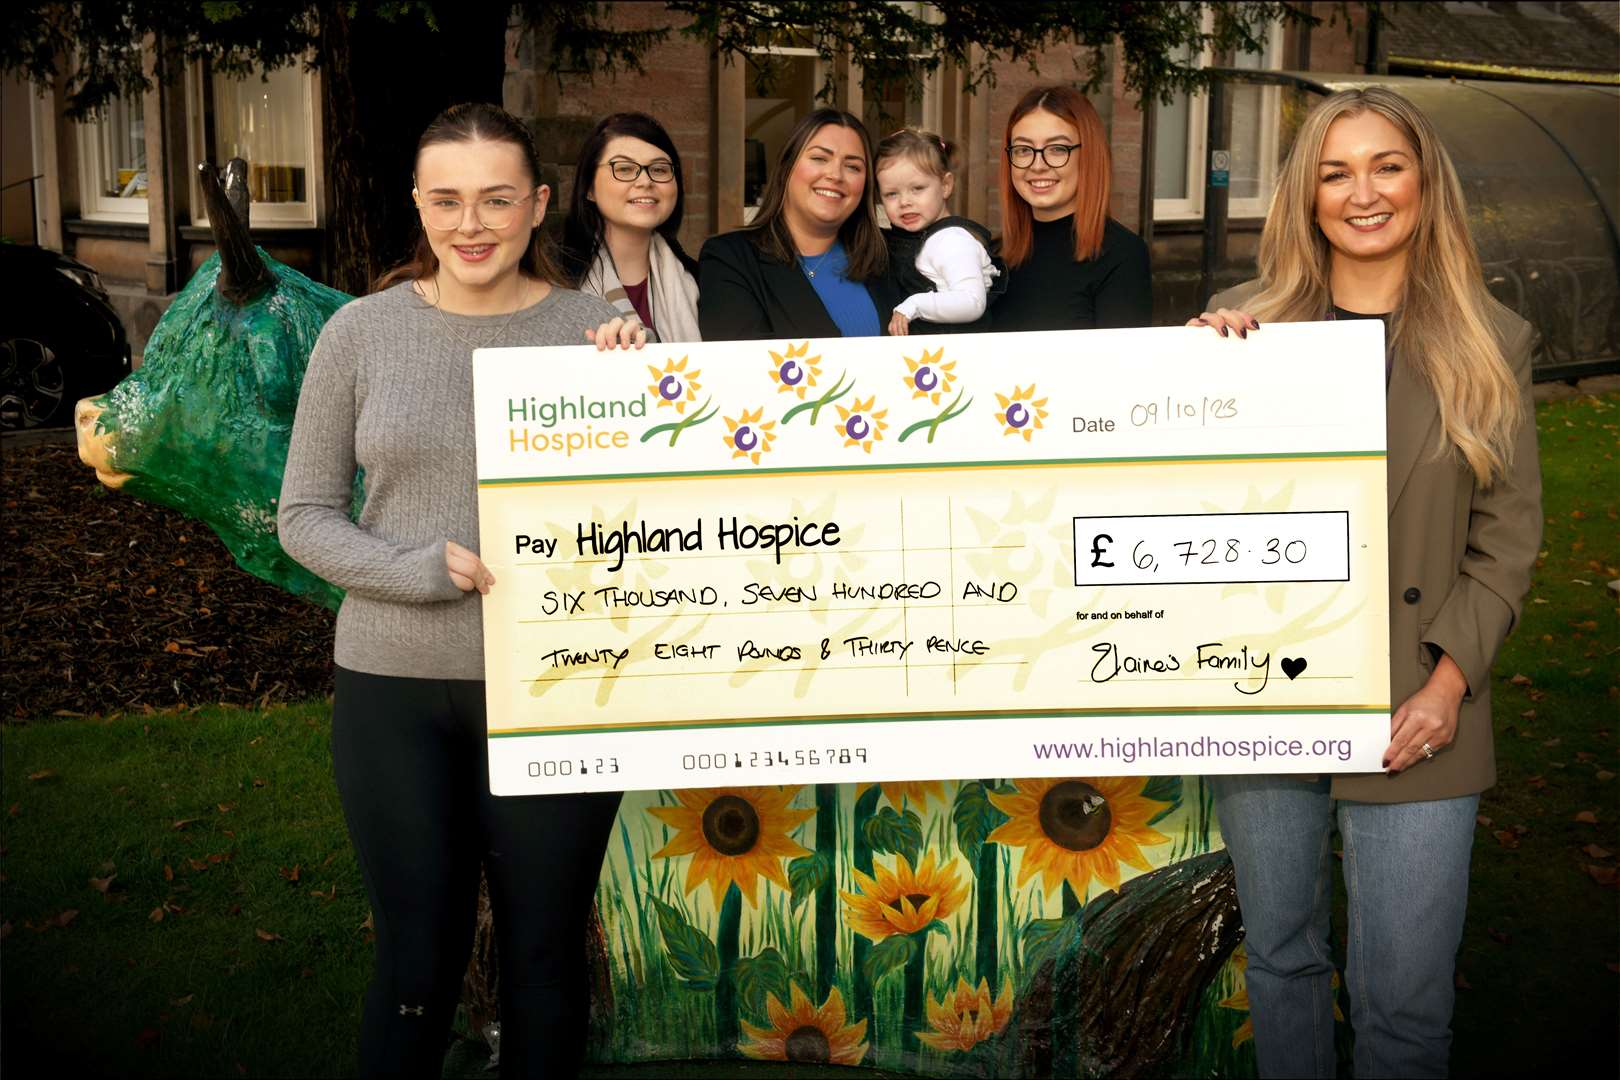 Abbie Thain (left) presenting the cheque to Highland Hospice fundraiser Emma Nicol, along with (from left) Hannah MacKenzie, Lauren Pirie (holding Willow) and Ellie Thain. Picture: James Mackenzie